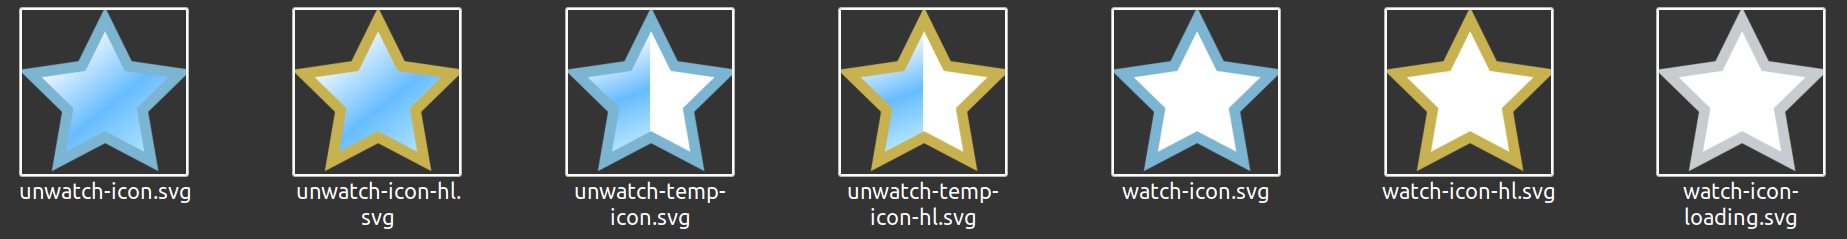 watch-stars.png (239×1 px, 60 KB)